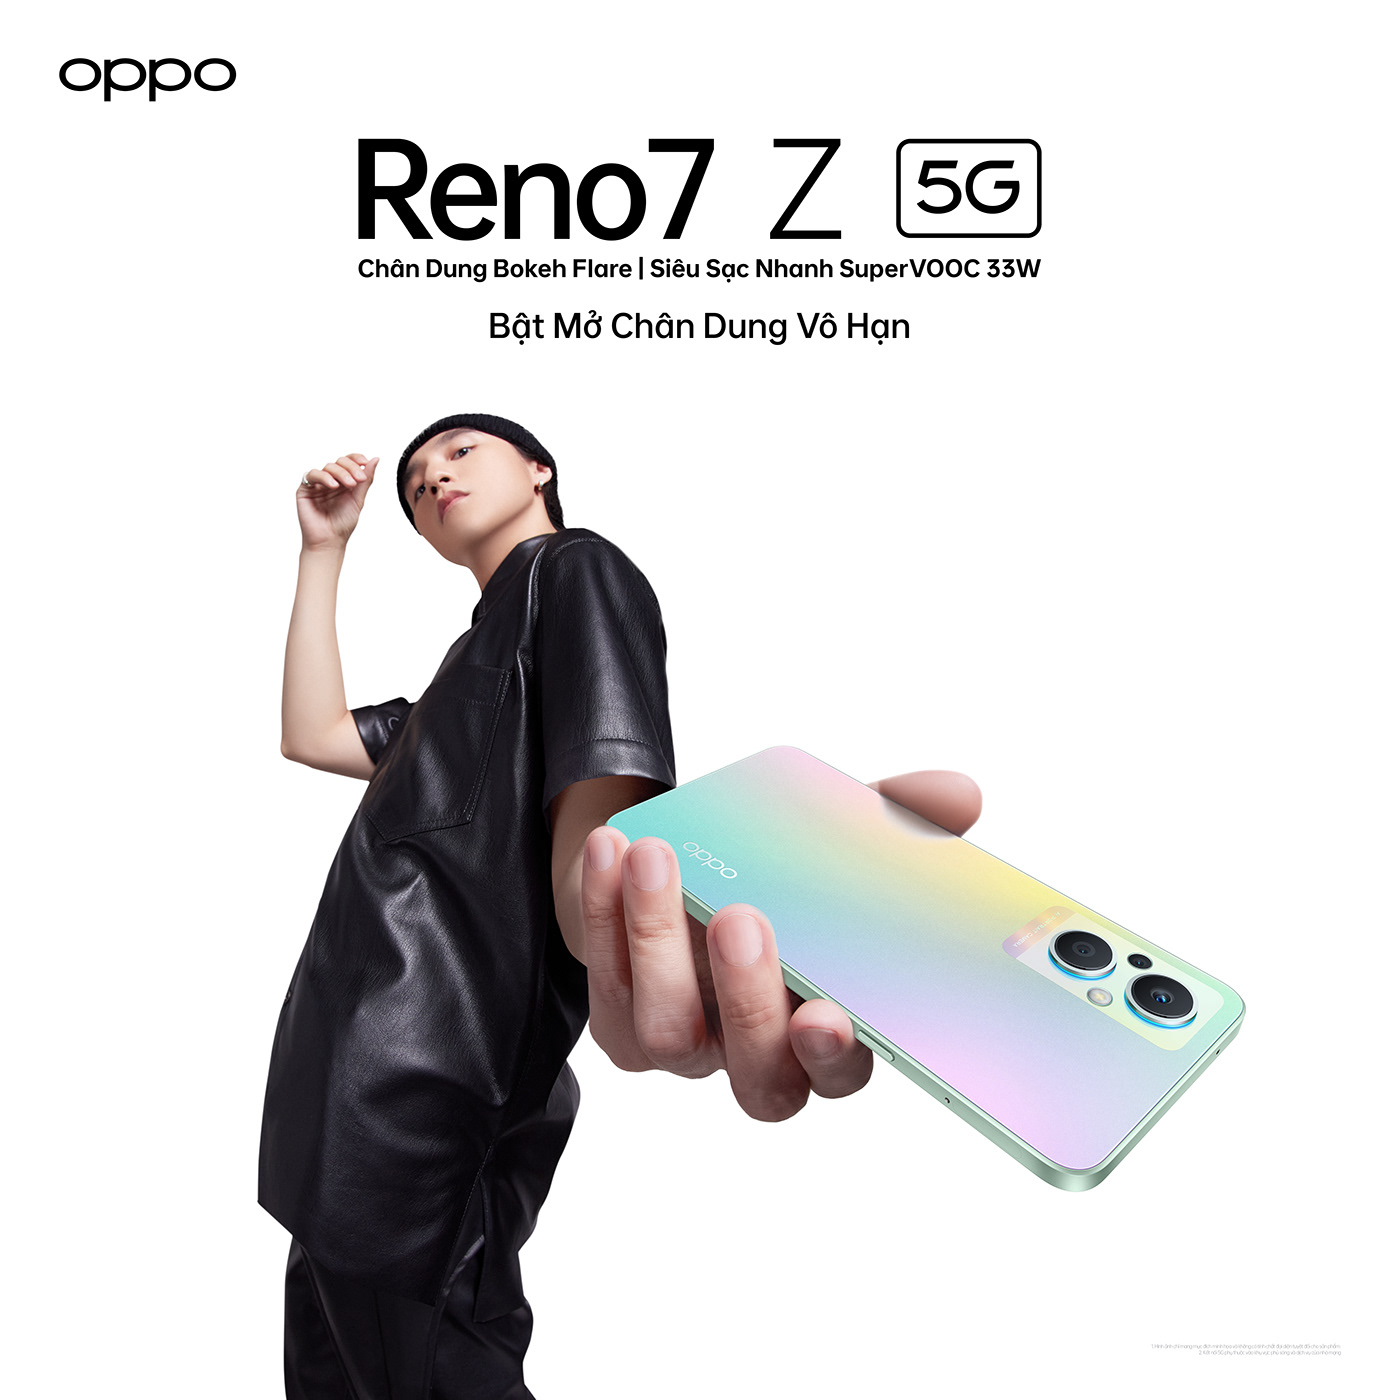 cinematography Editing  Oppo photoshoot Reno reno7z5g smartphone video after effects Advertising 